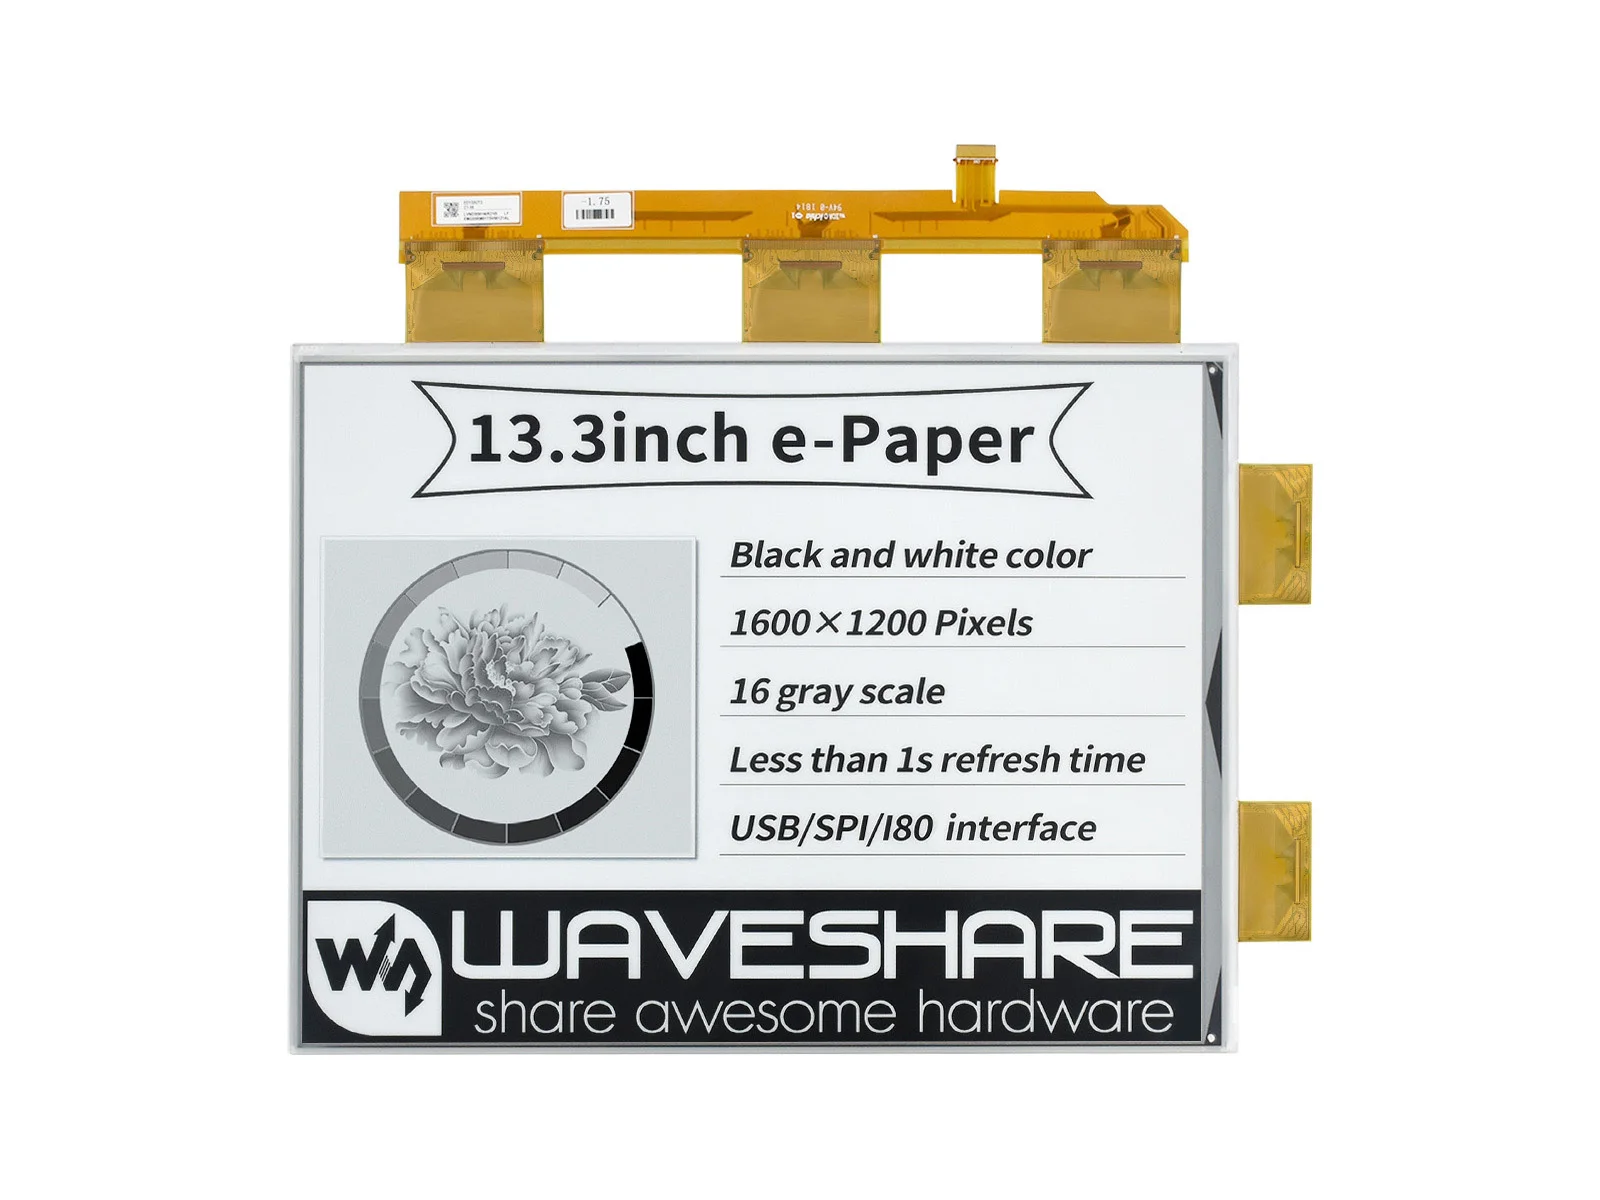 

Waveshare 13.3inch E-Paper E-Ink Raw Display for Raspberry pi,1600×1200 Pixels, Black/White,16 Grey Scales,Parallel Port,No PCB